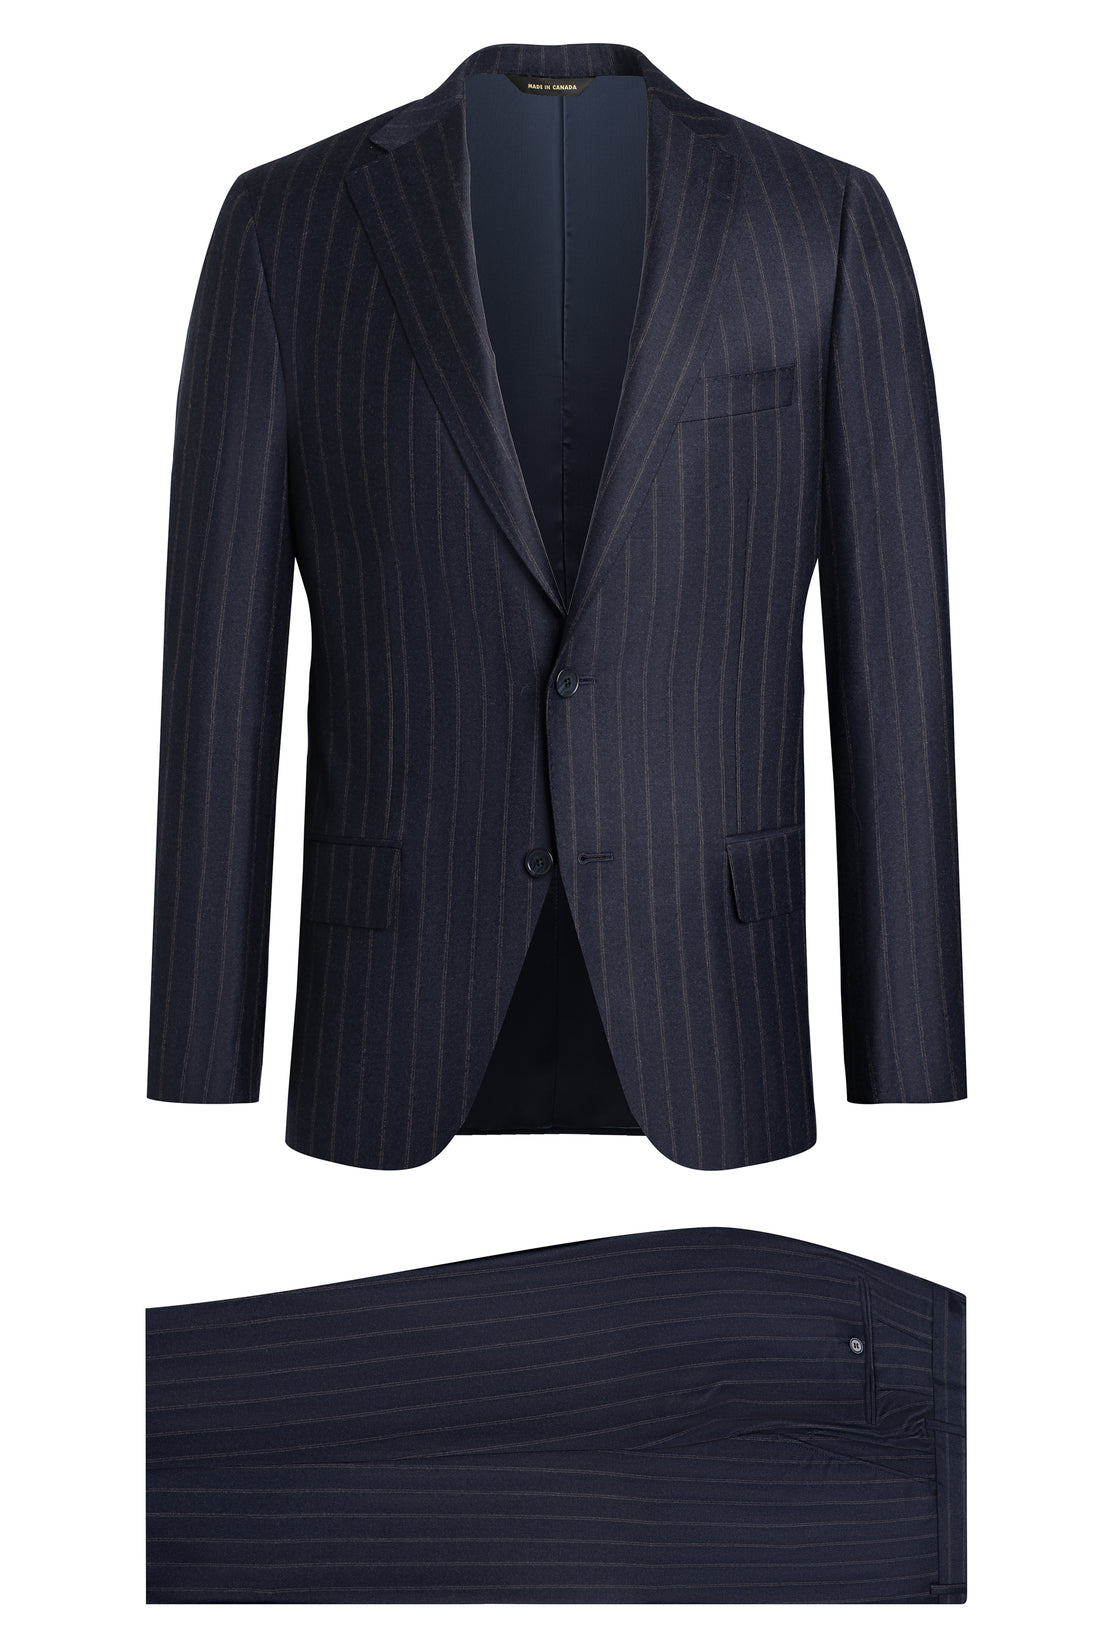 Glencheck Wool Suit - KHL CLOTHING COMPANY